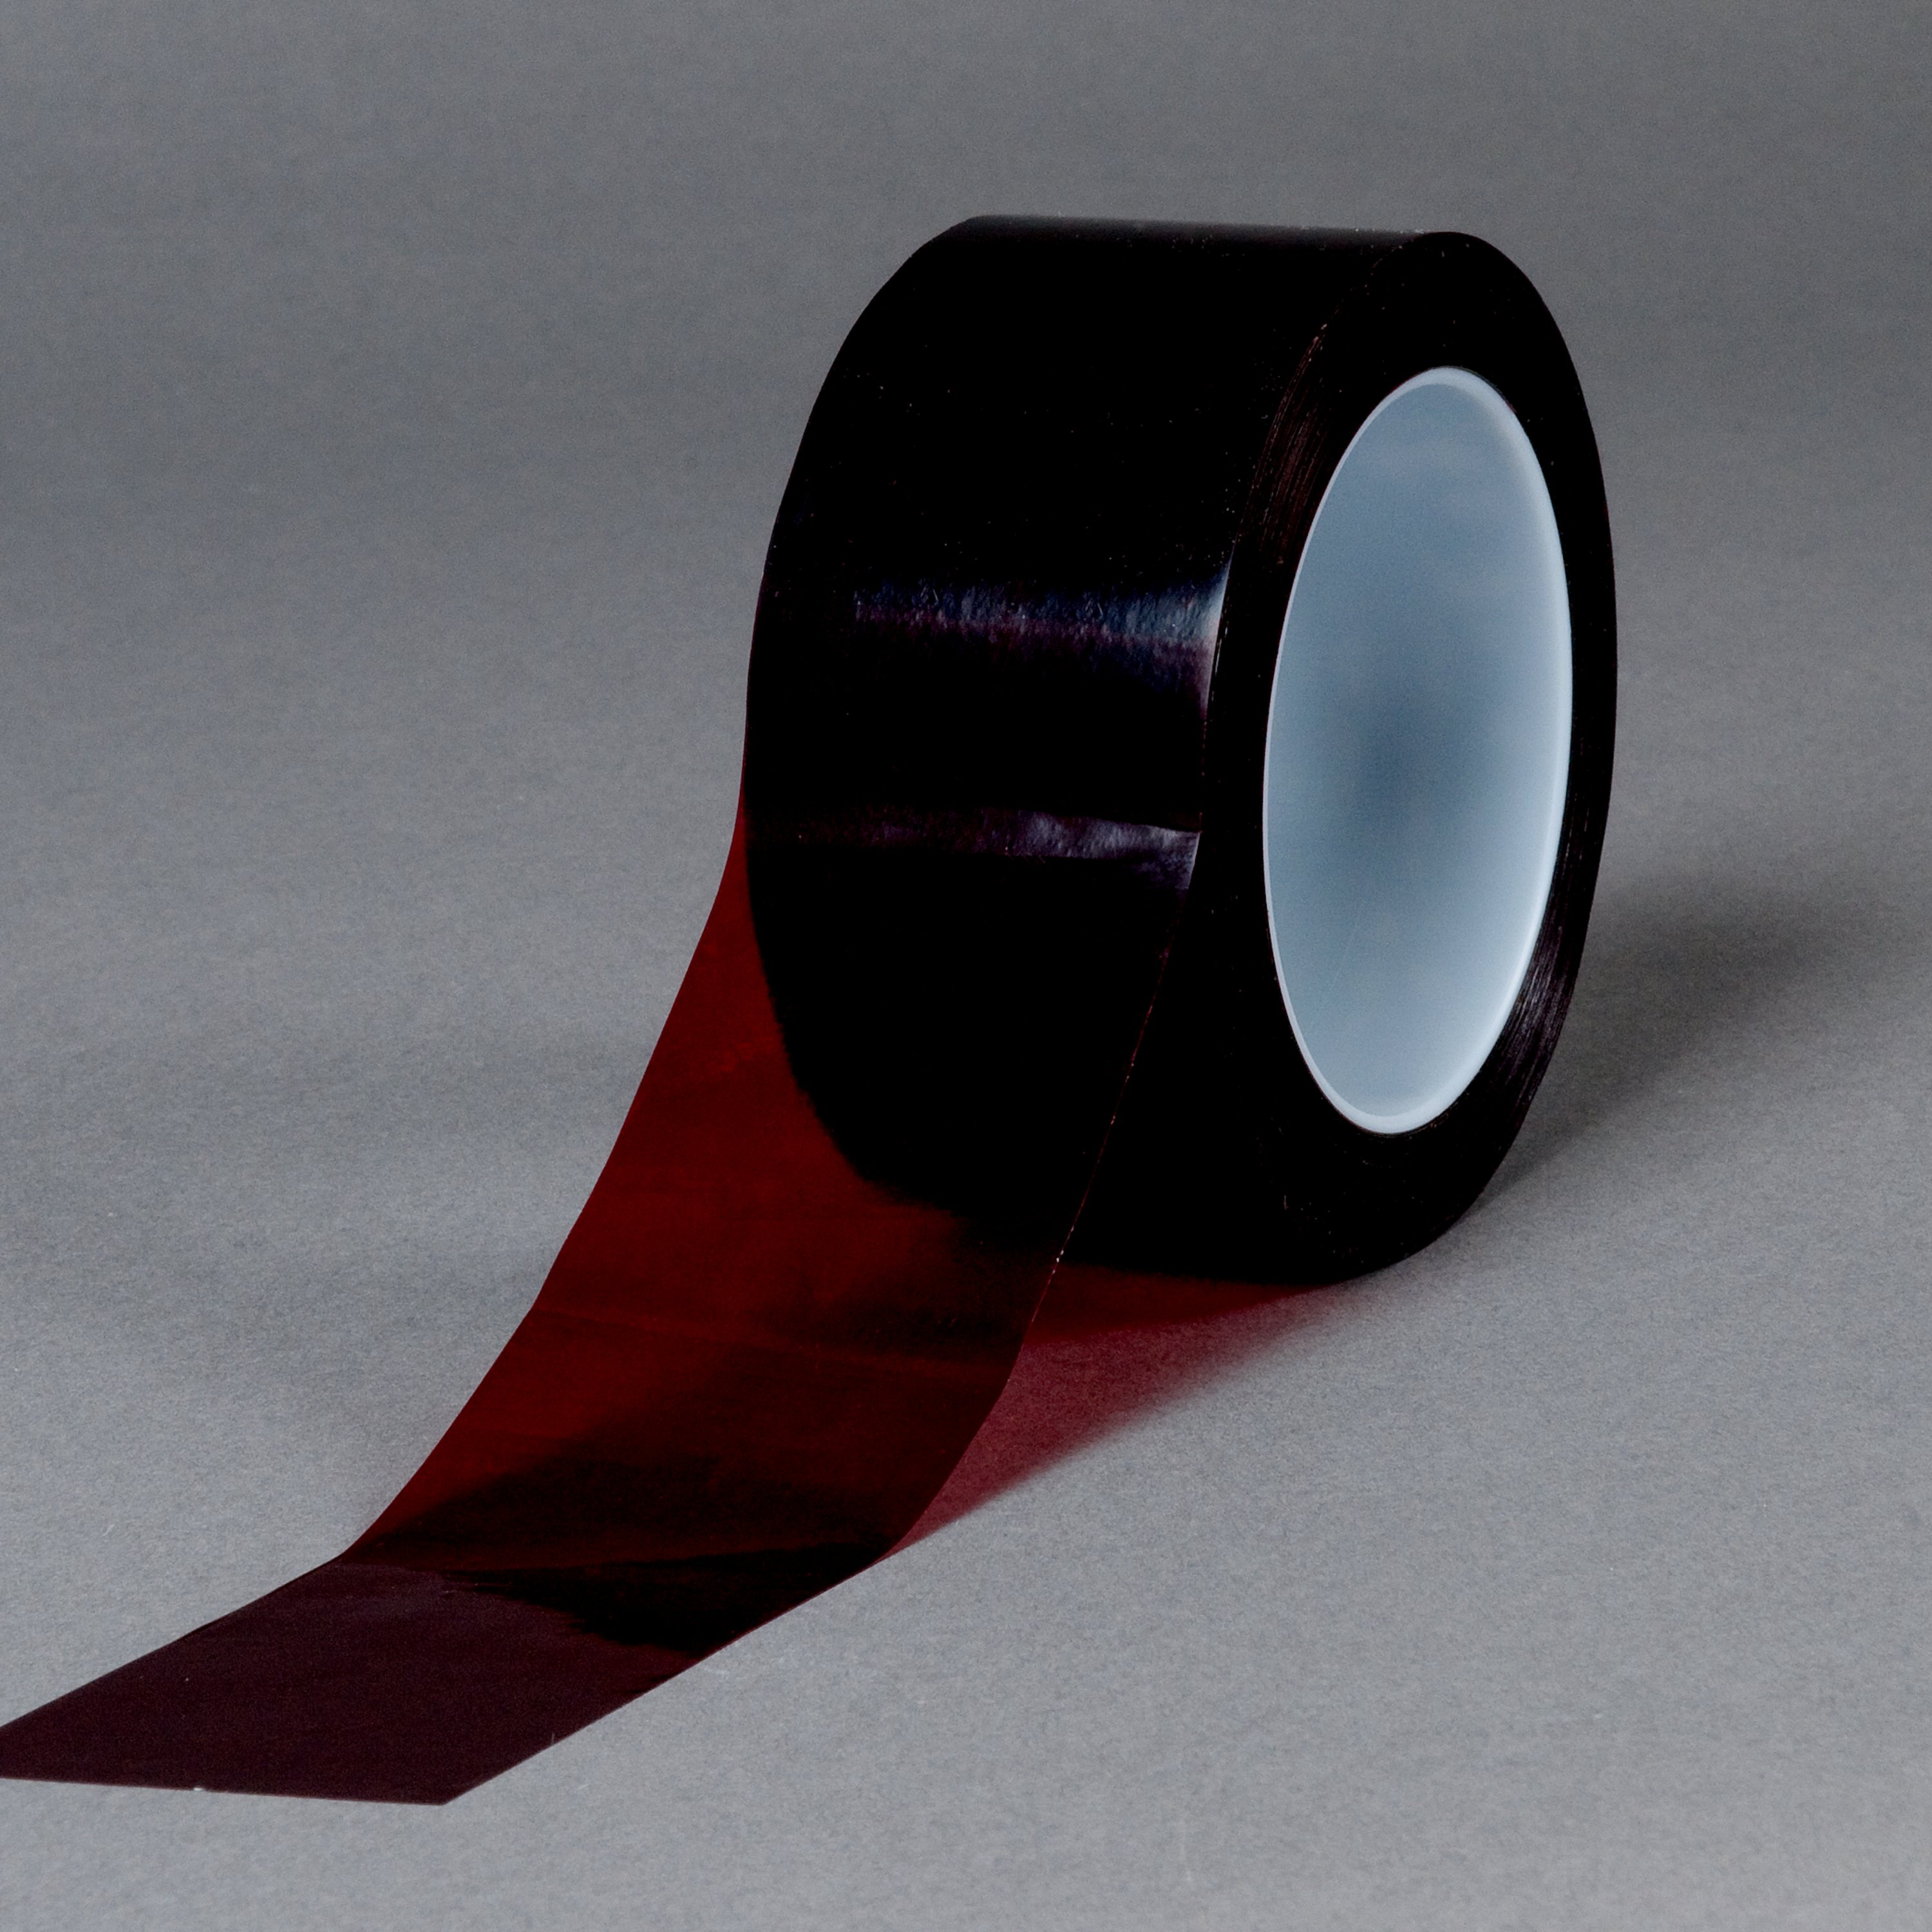 3M™ Lithographers Tape 616 is a Ruby Red 2.4 mil unplasticized polyvinyl chloride (UPVC) film tape with a rubber adhesive.